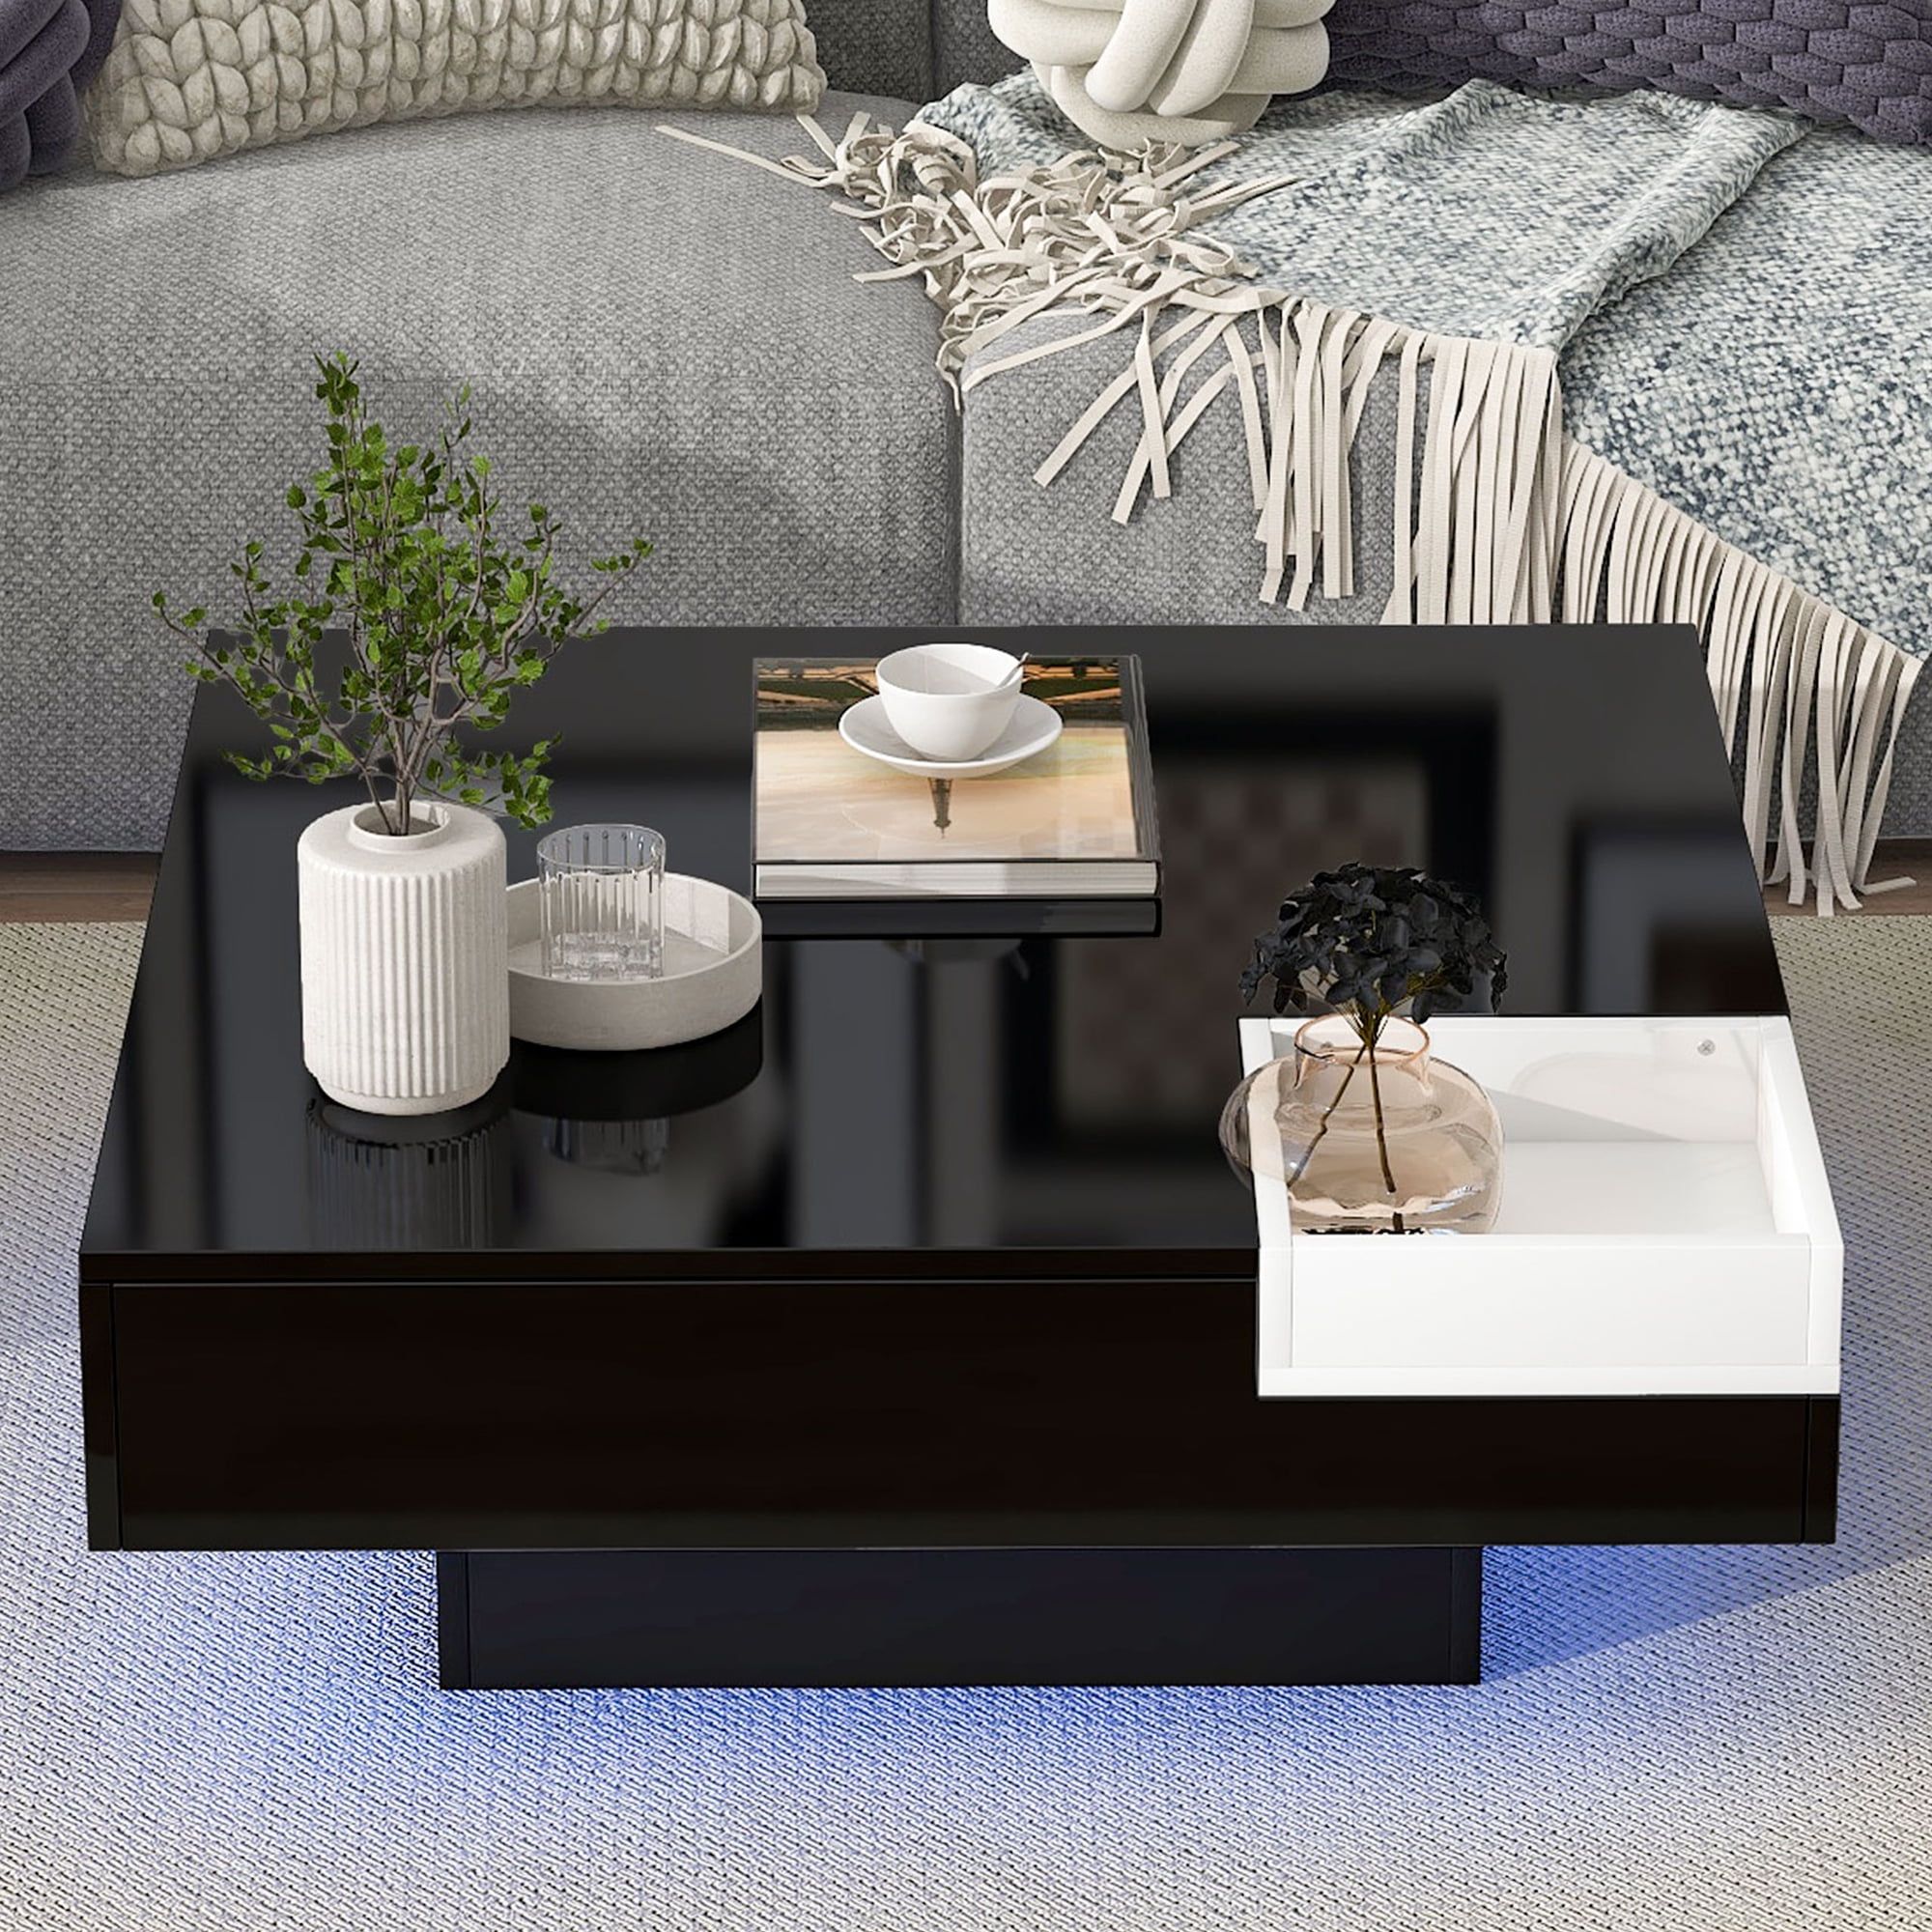 Hsunns Black Led Coffee Table With Detachable Tray, Modern High Glossy  Center Table, Square Cocktail Table, Wooden Living Room Table With 16  Colors Led Lights, Contemporary Living Room Furniture – Walmart With Regard To Detachable Tray Coffee Tables (View 5 of 15)